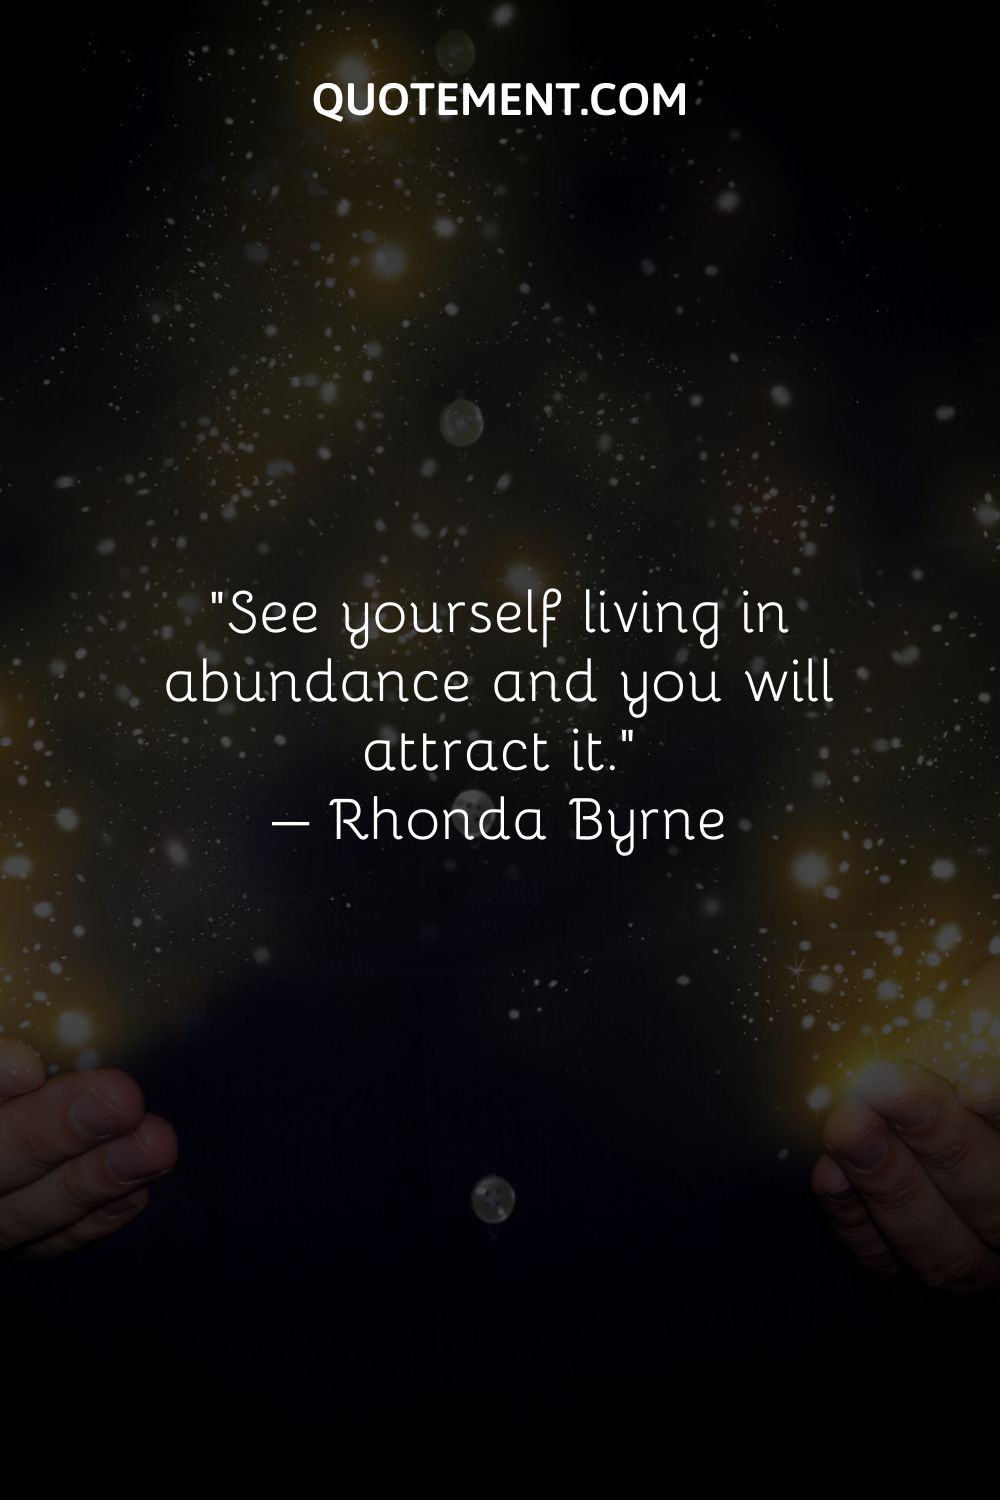 See yourself living in abundance and you will attract it.